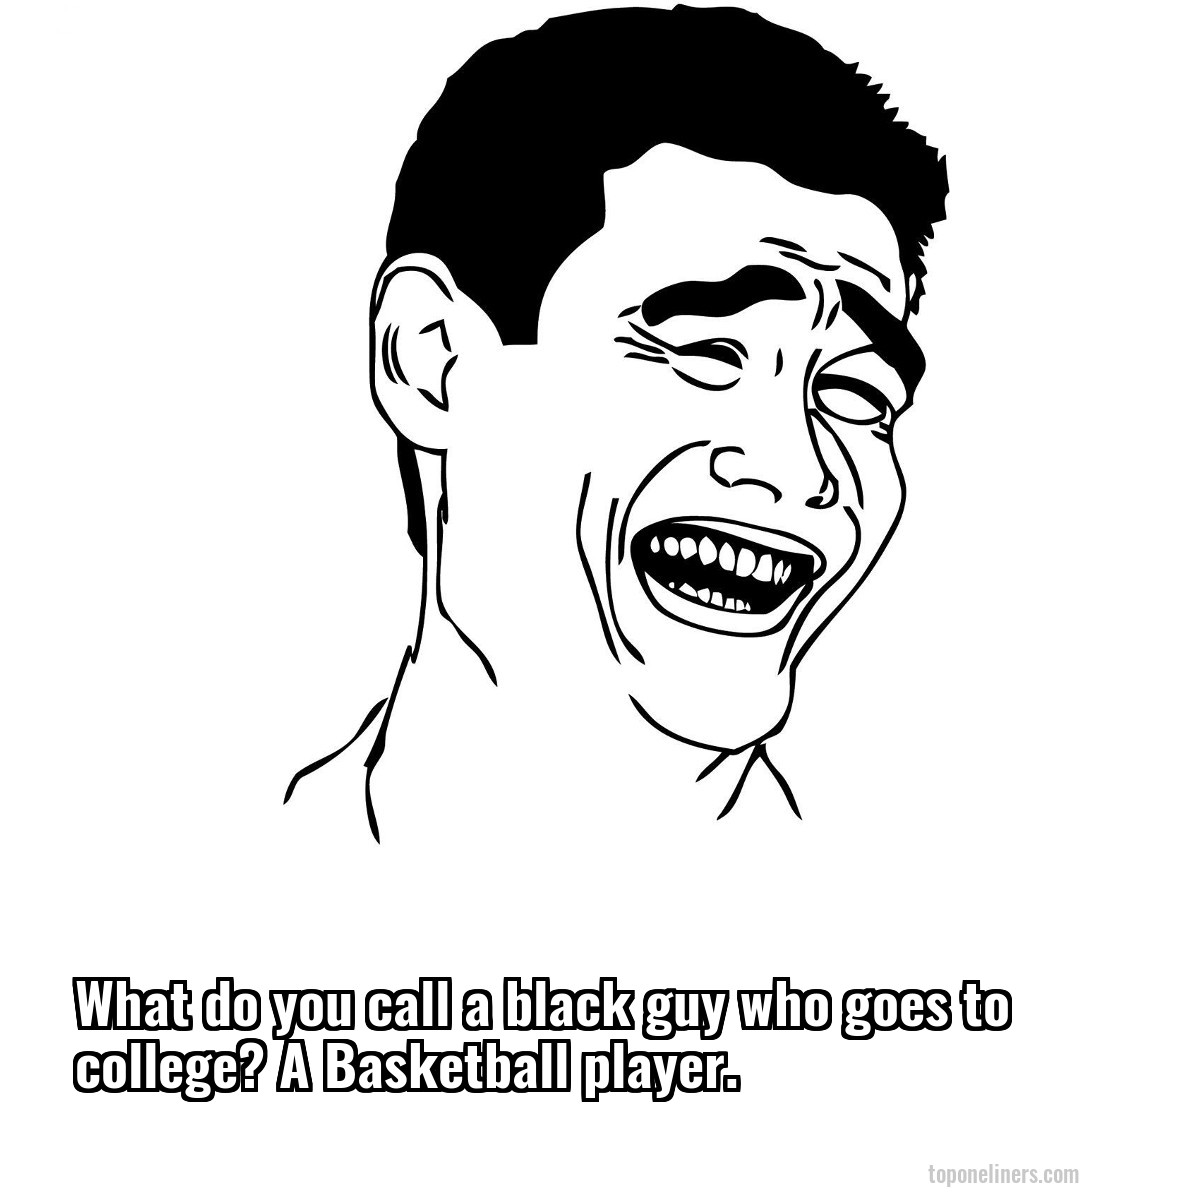 What do you call a black guy who goes to college? A Basketball player.
